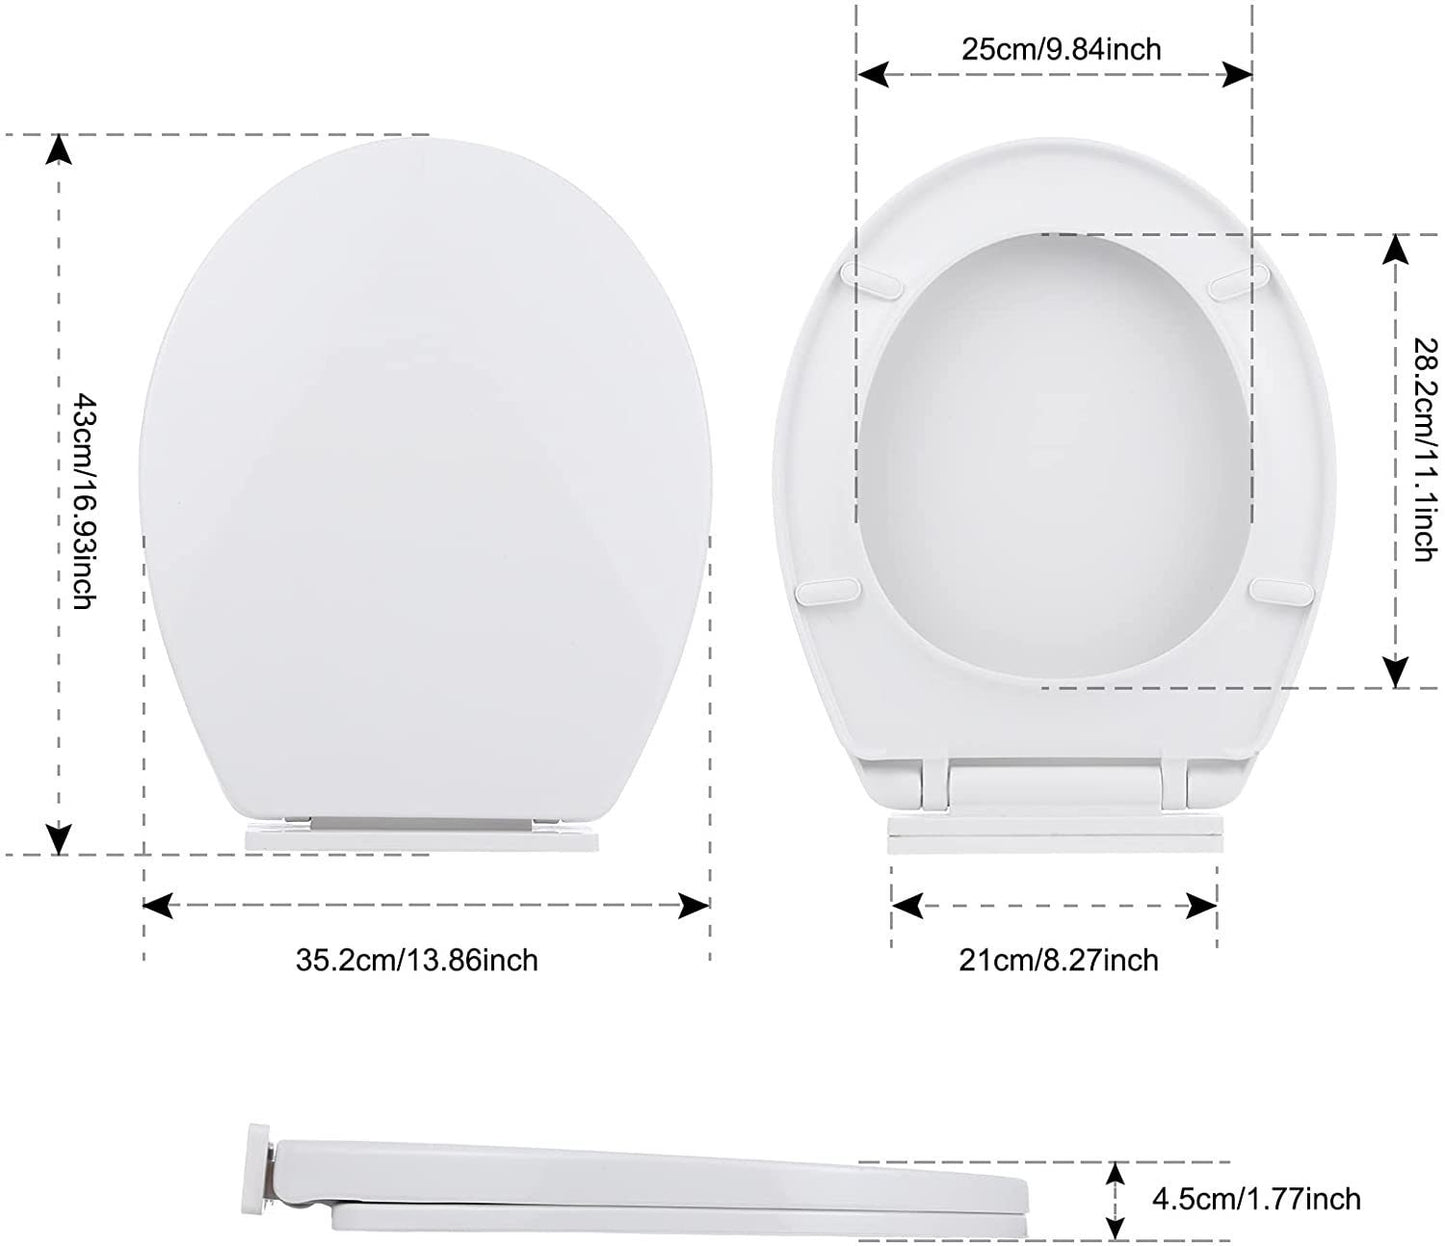 Miibox Removable Round Bowl White Toilet Seat, with Nonslip Grip-Tight Never Loosen Bumpers Prevent Shifting, No Slamming Slow and Quiet-Close Seat Cover, Quick Release Hinges for Easy Cleaning